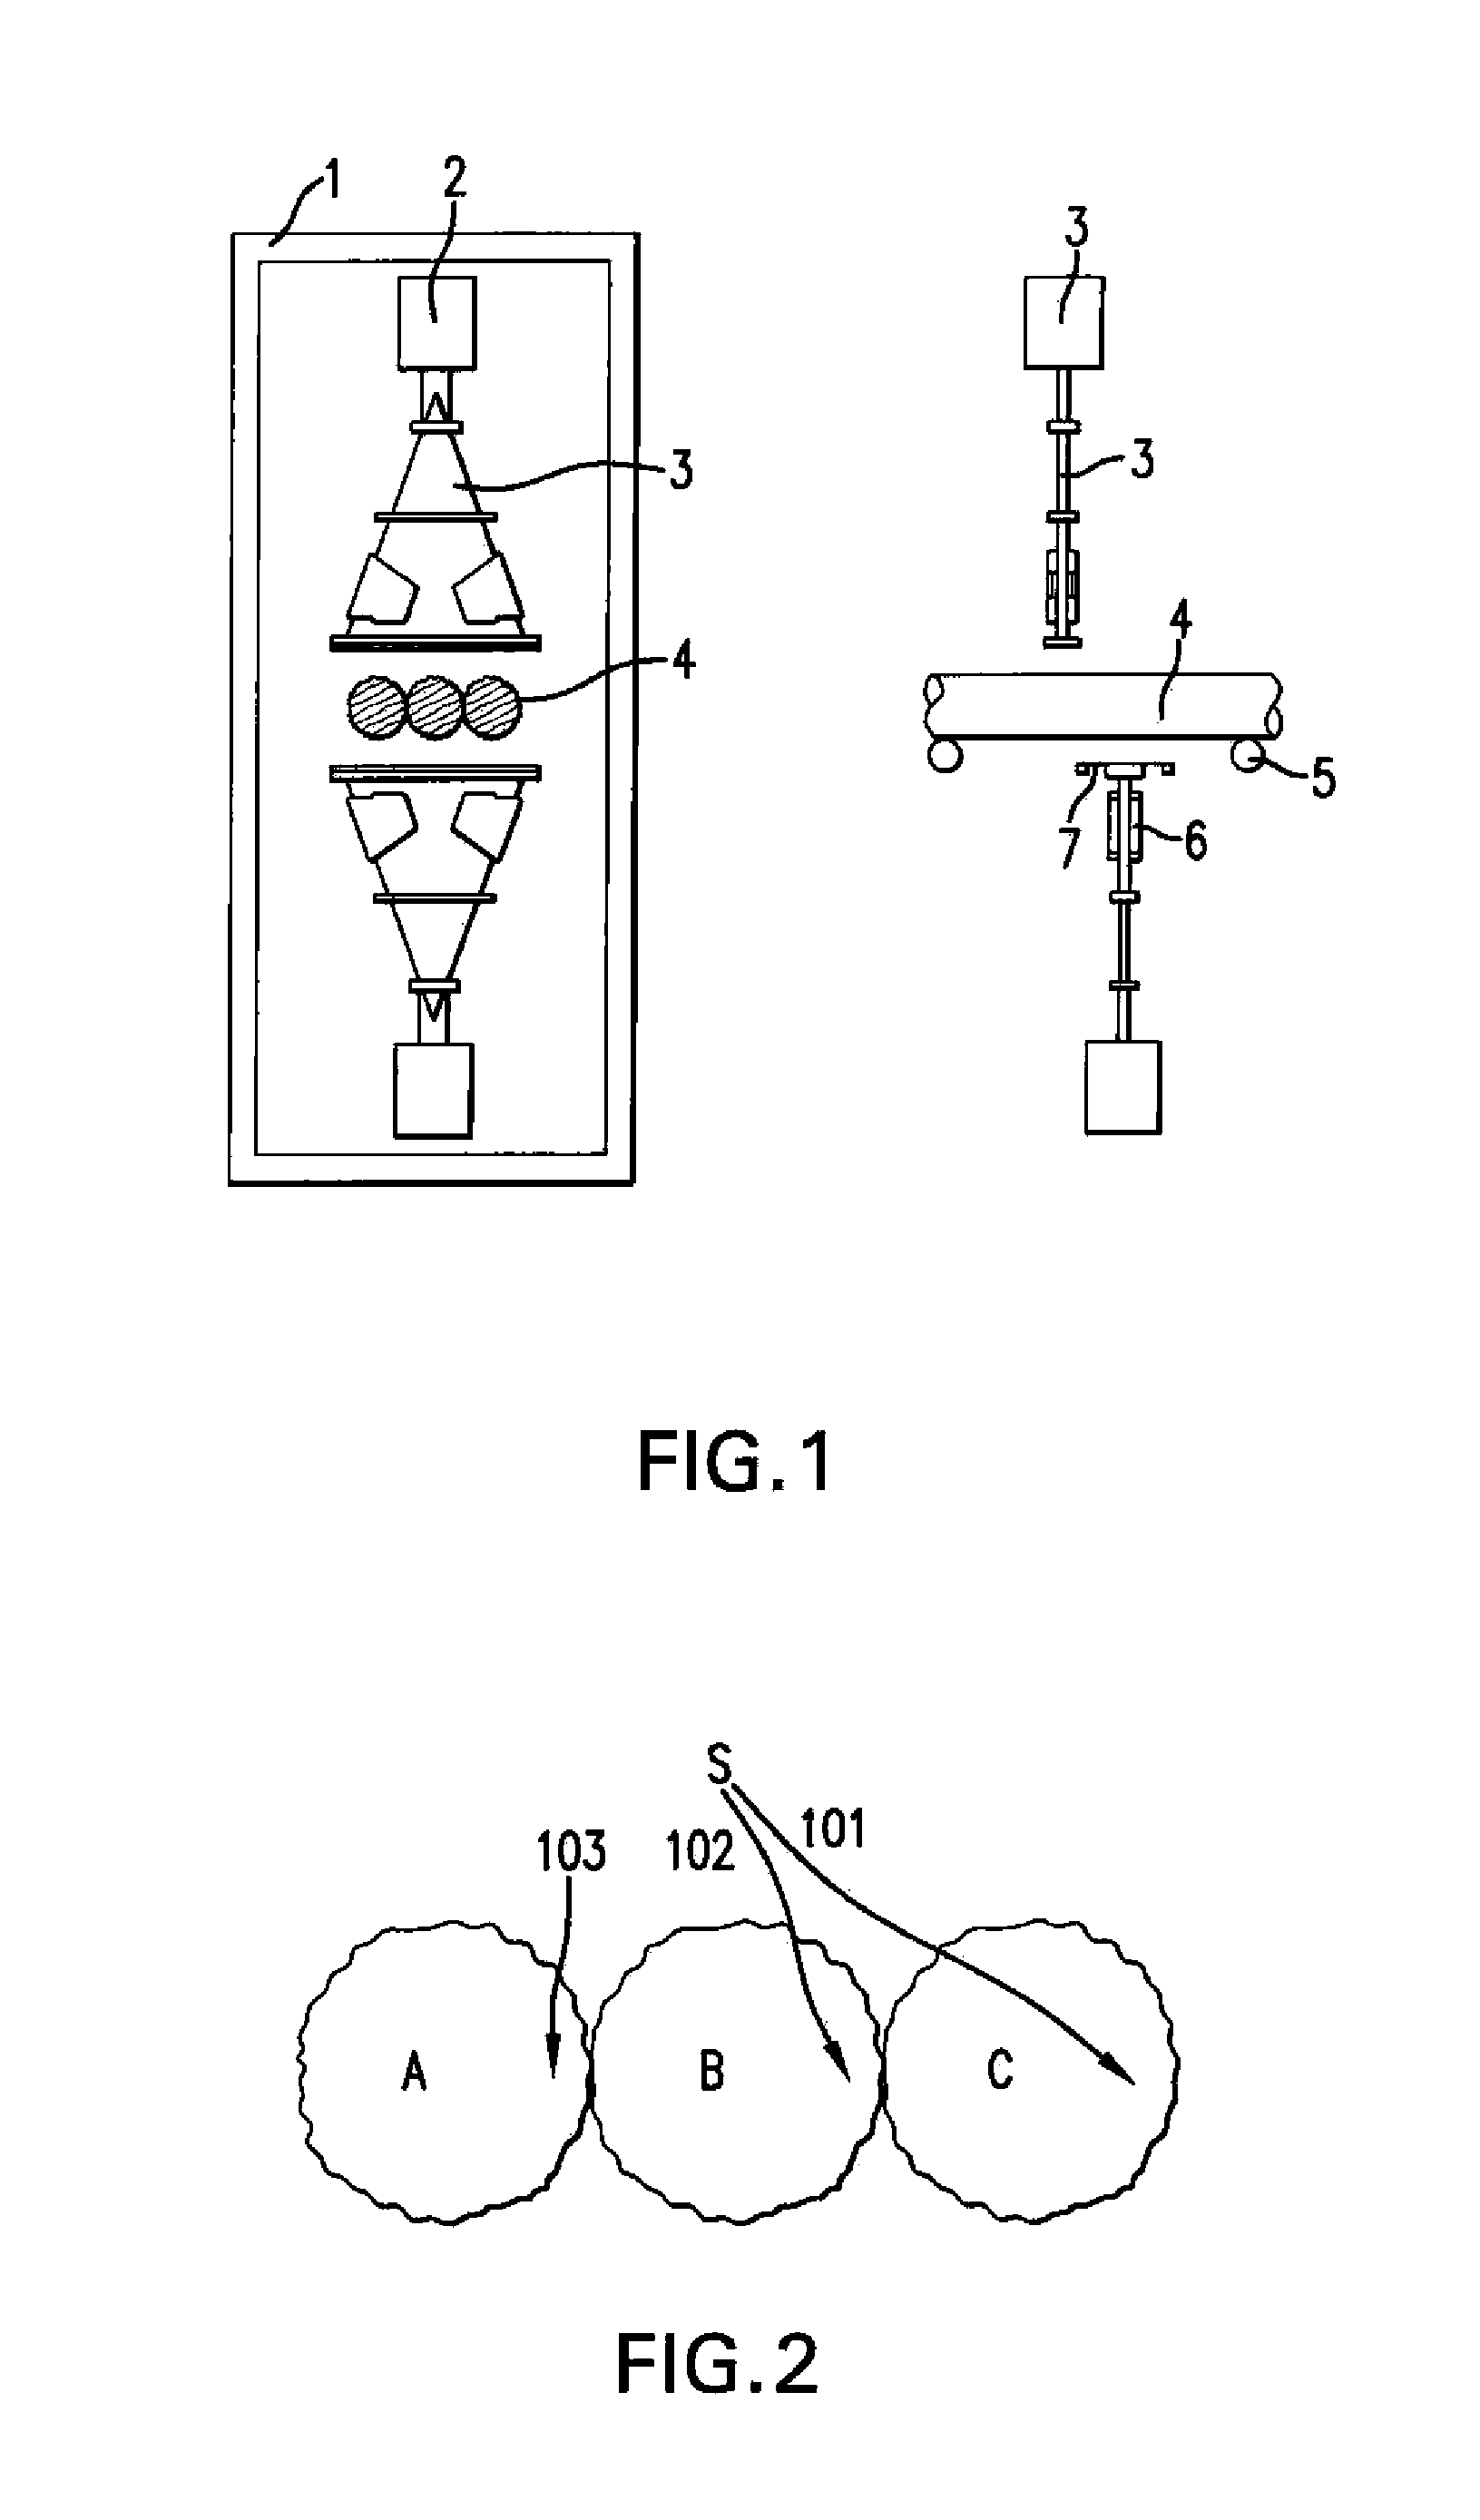 Method and device of irradiation of logs with electron beams as a phytosanitary treatment